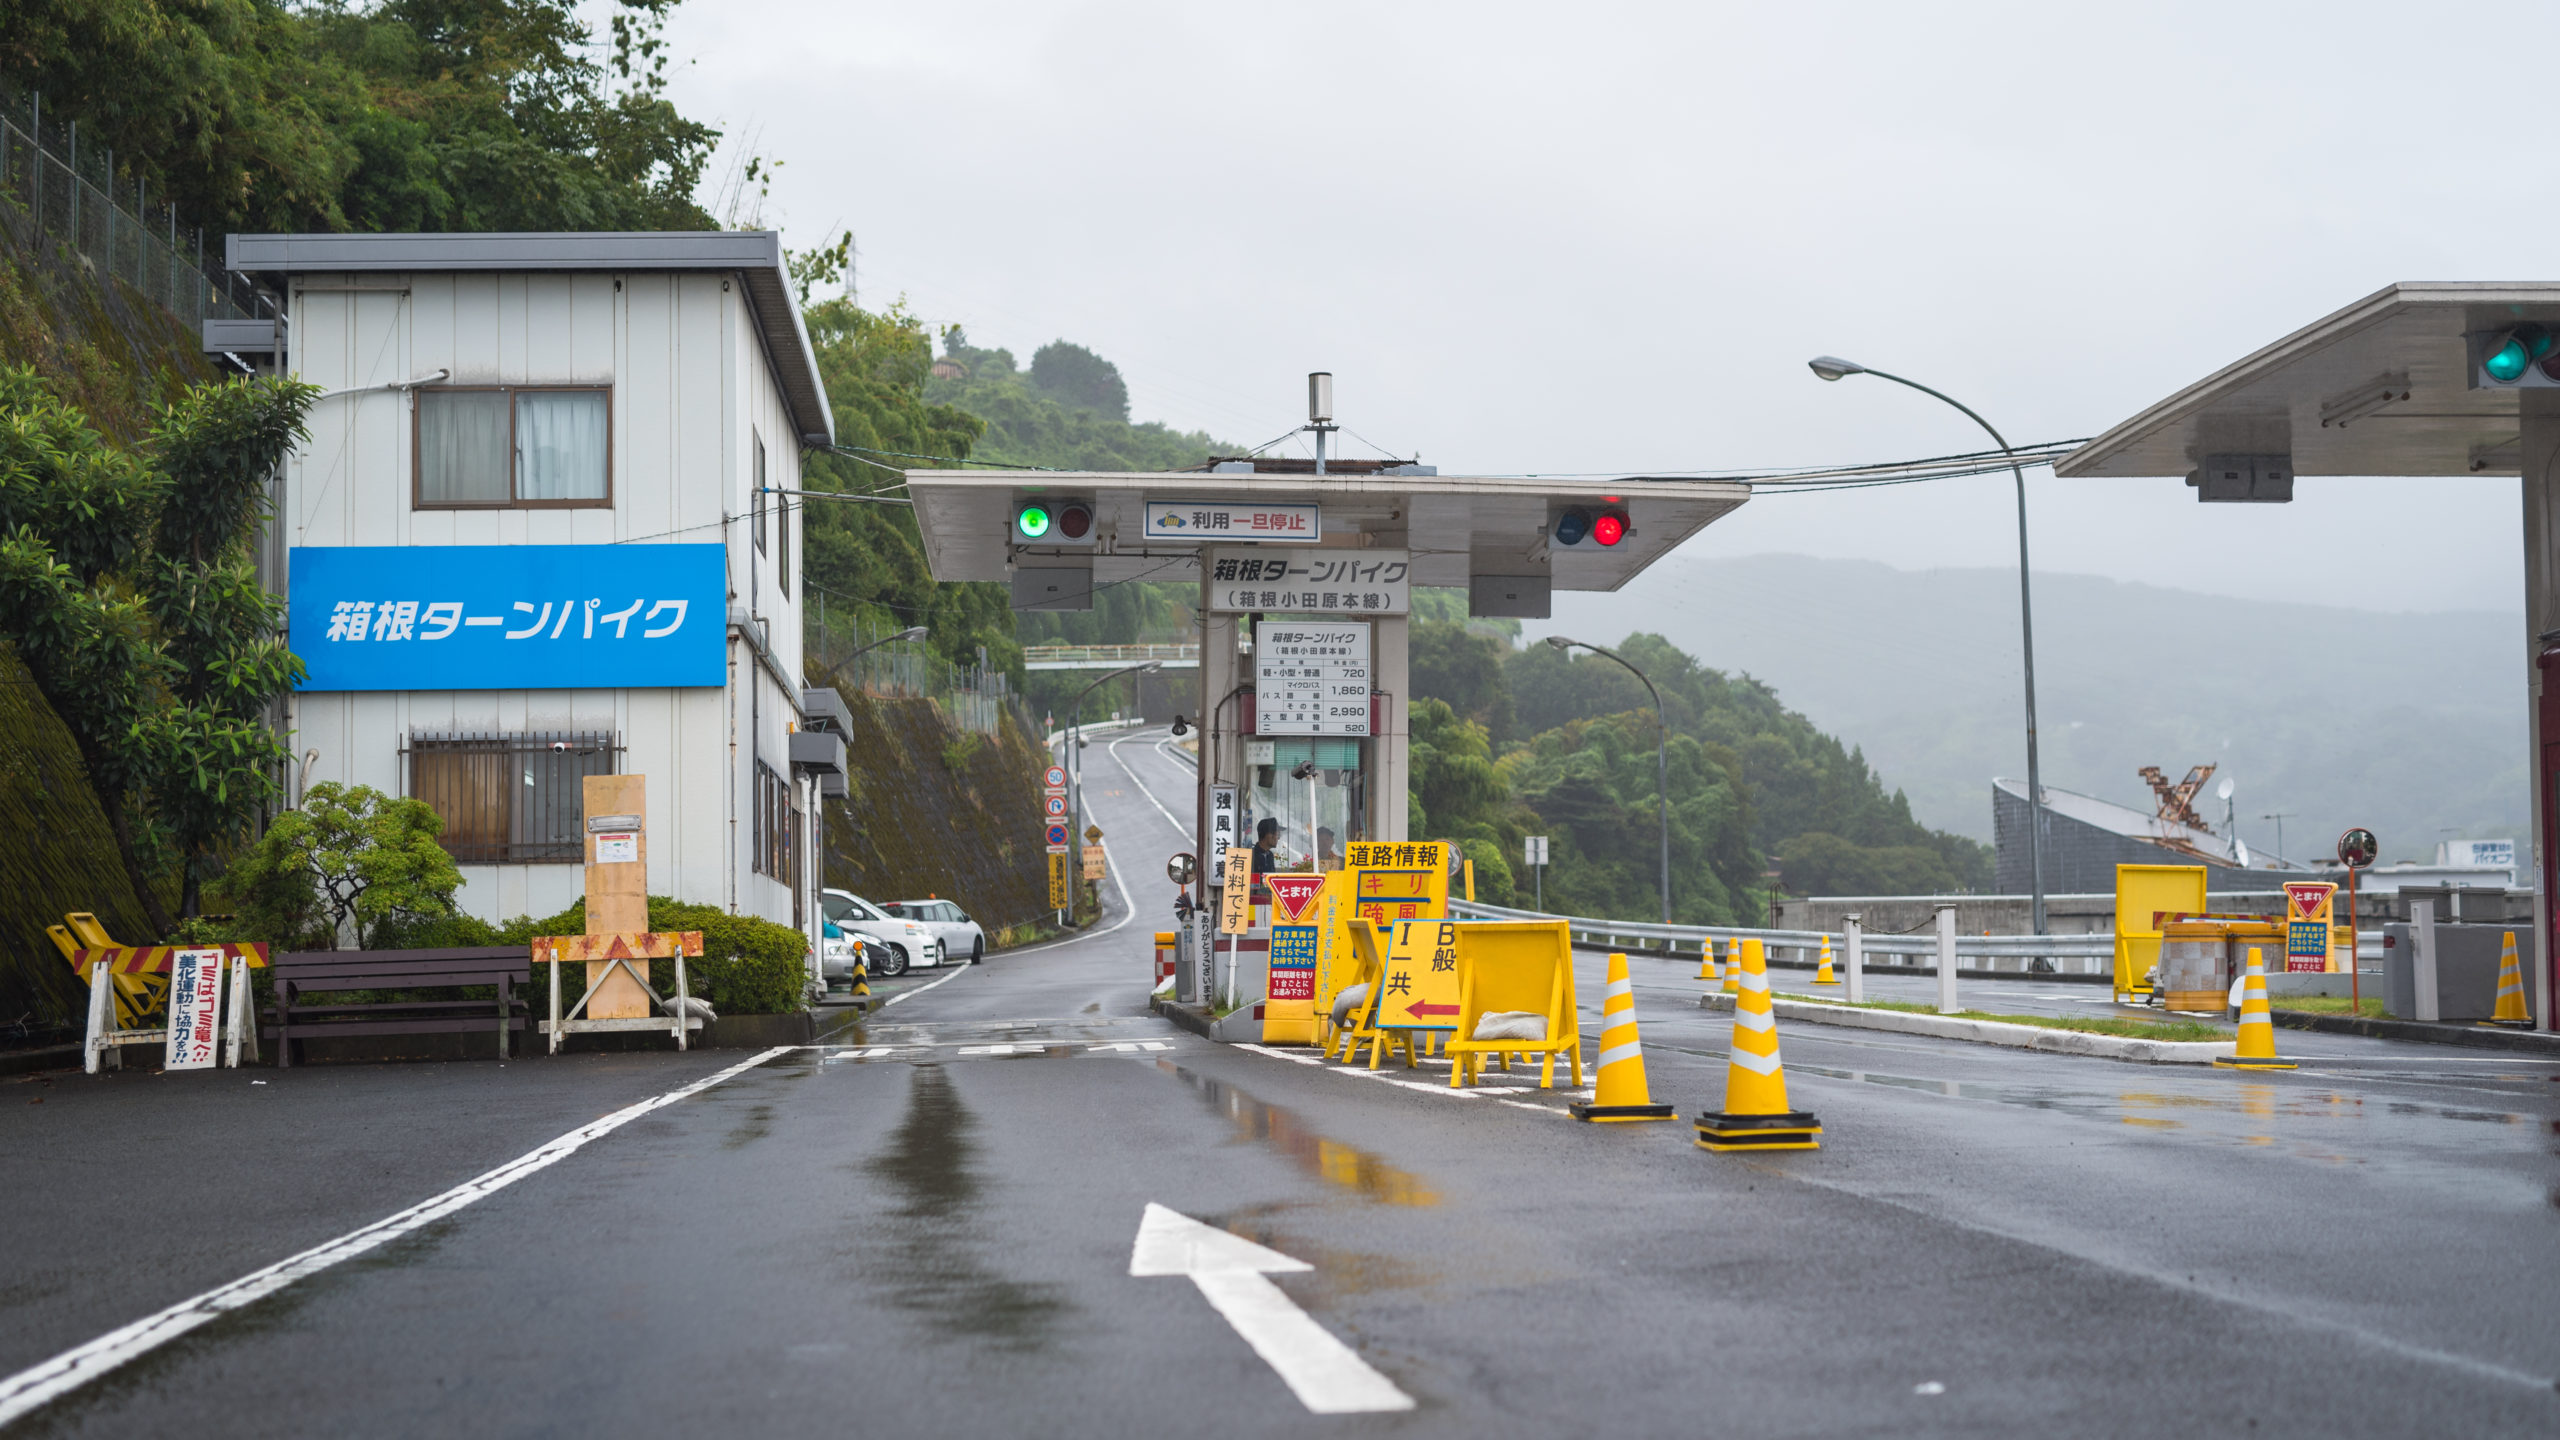 How To Find One Of Japan’s Best Driving Roads Just Two Hours Outside Tokyo